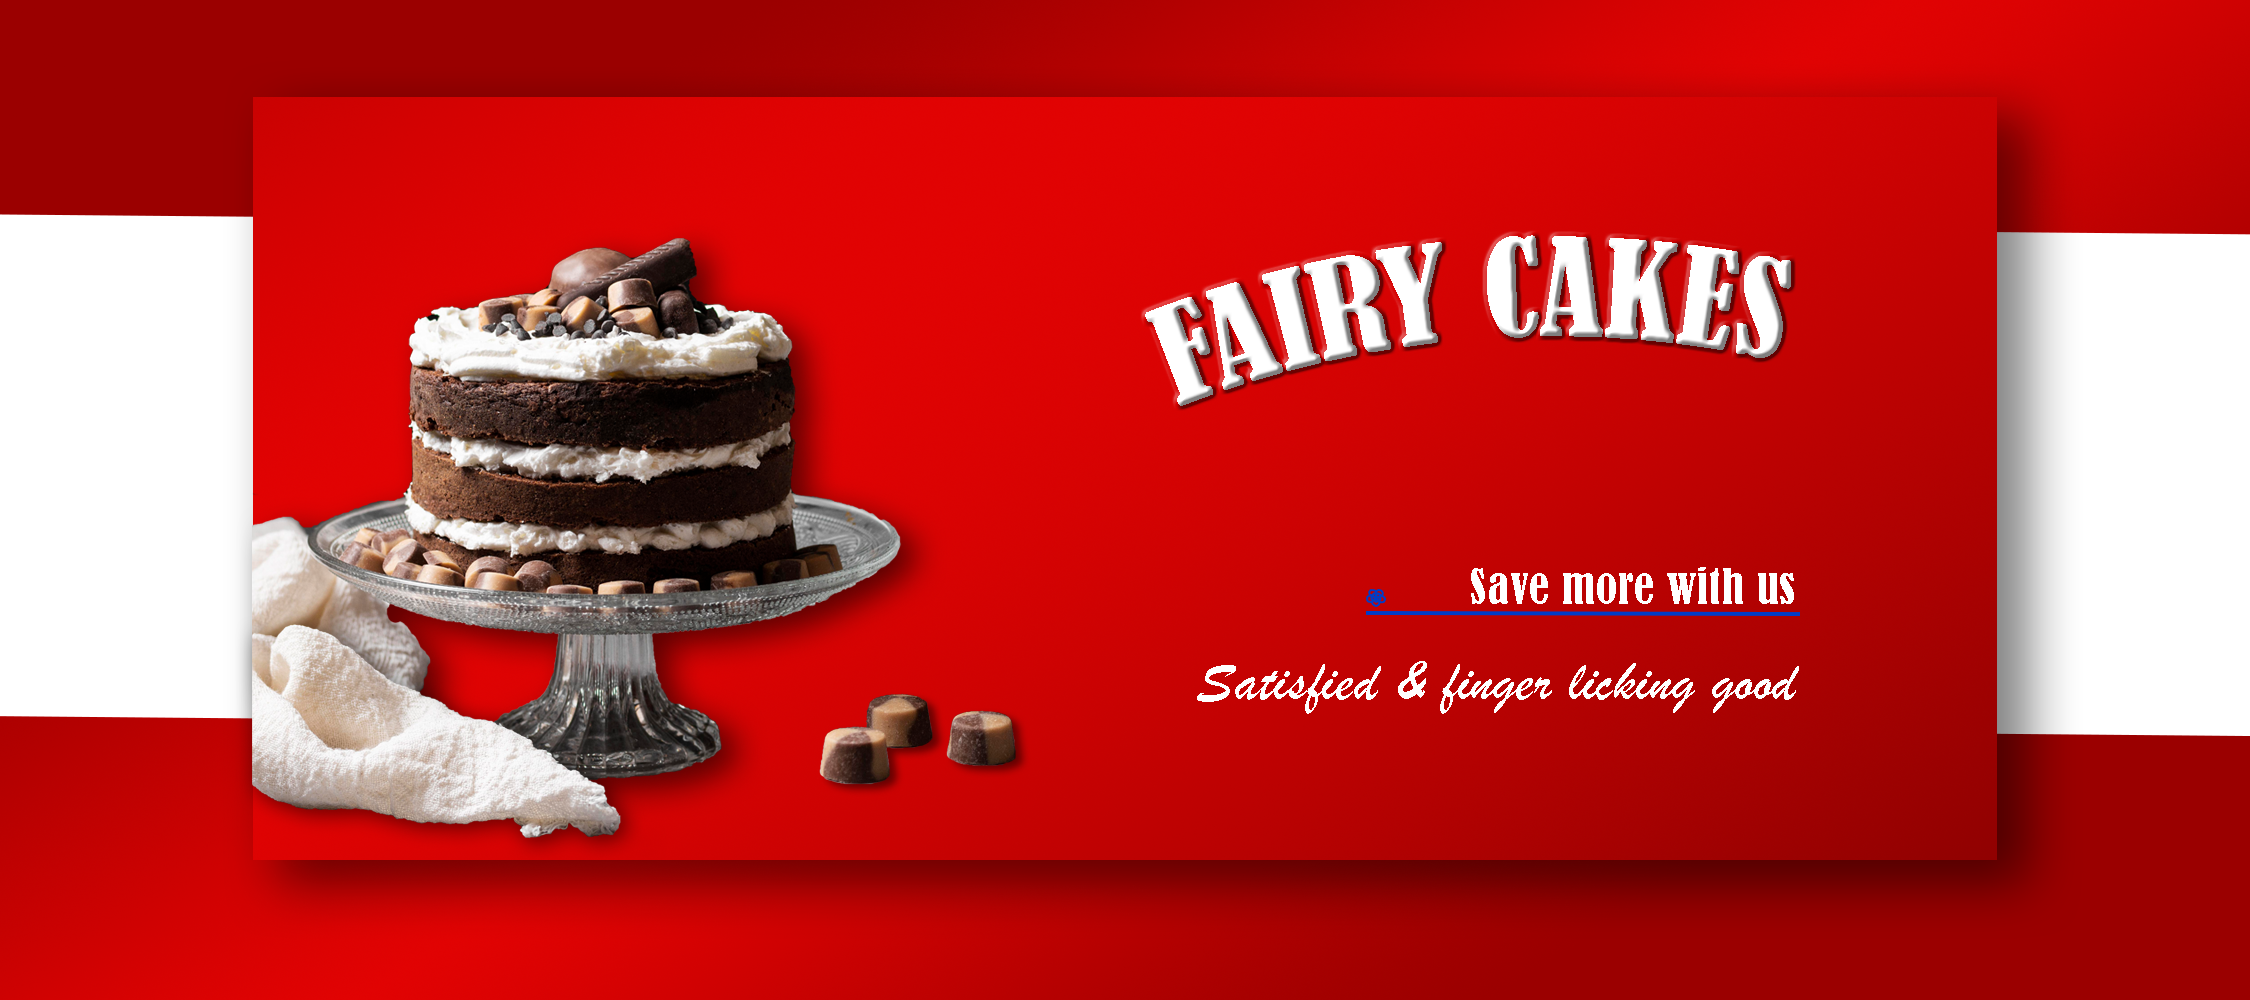 Fairy Cake, 43 Gipsy Ln in Leicester - Restaurant reviews